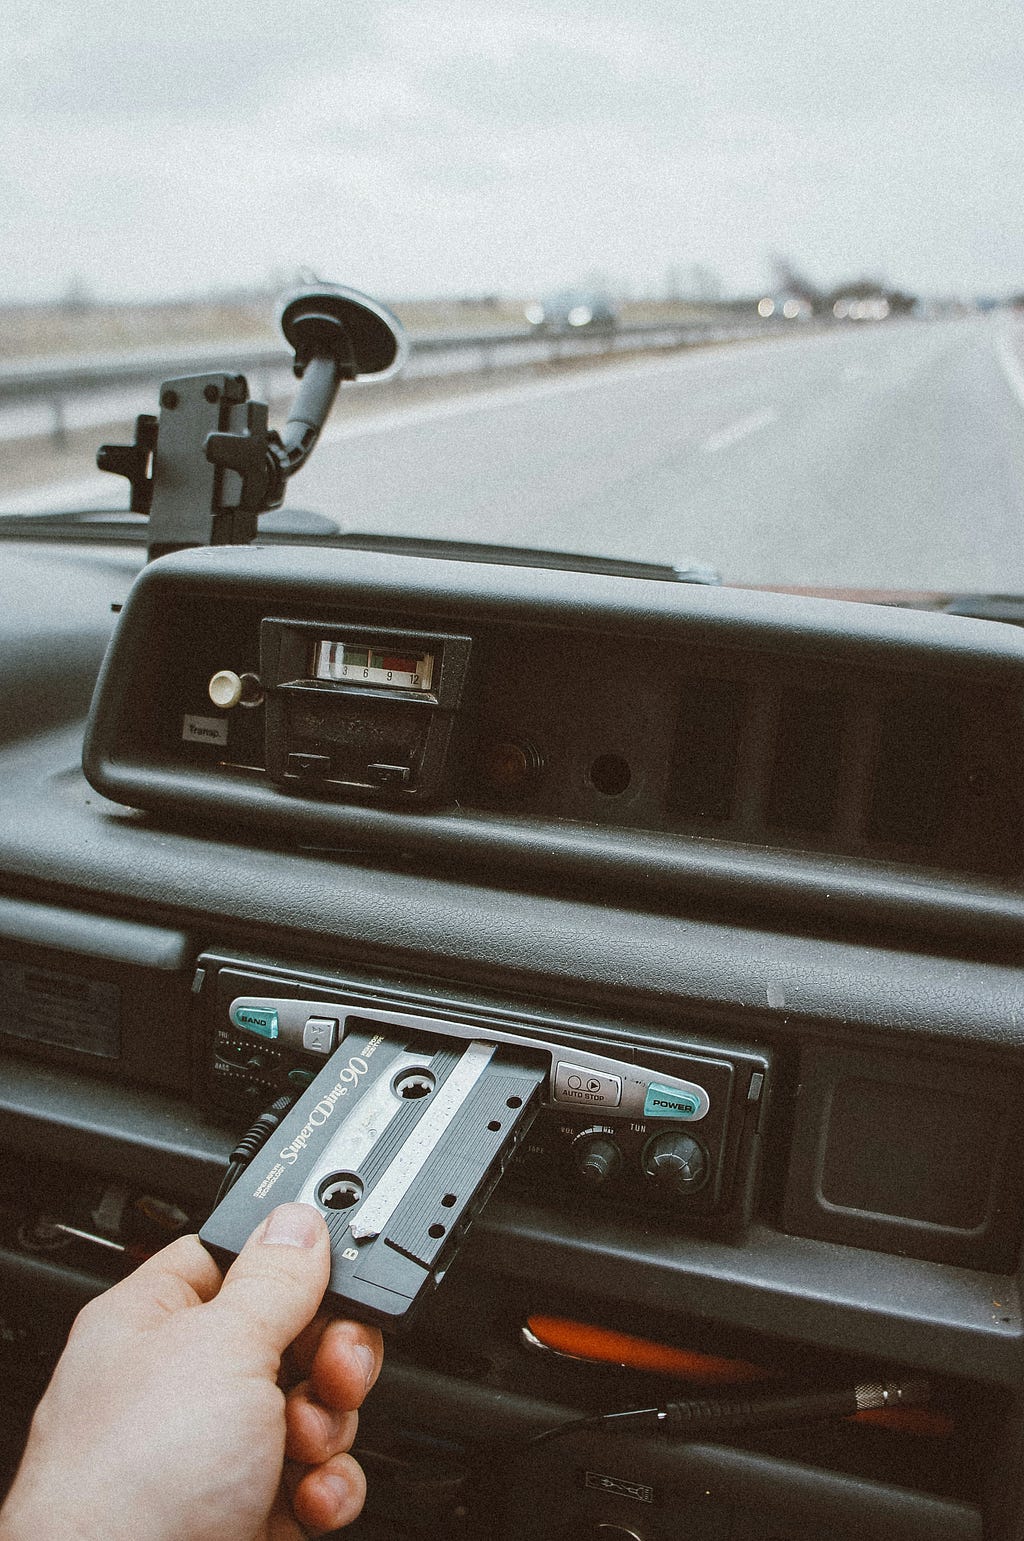 A hand placing a cassette into a car stereo